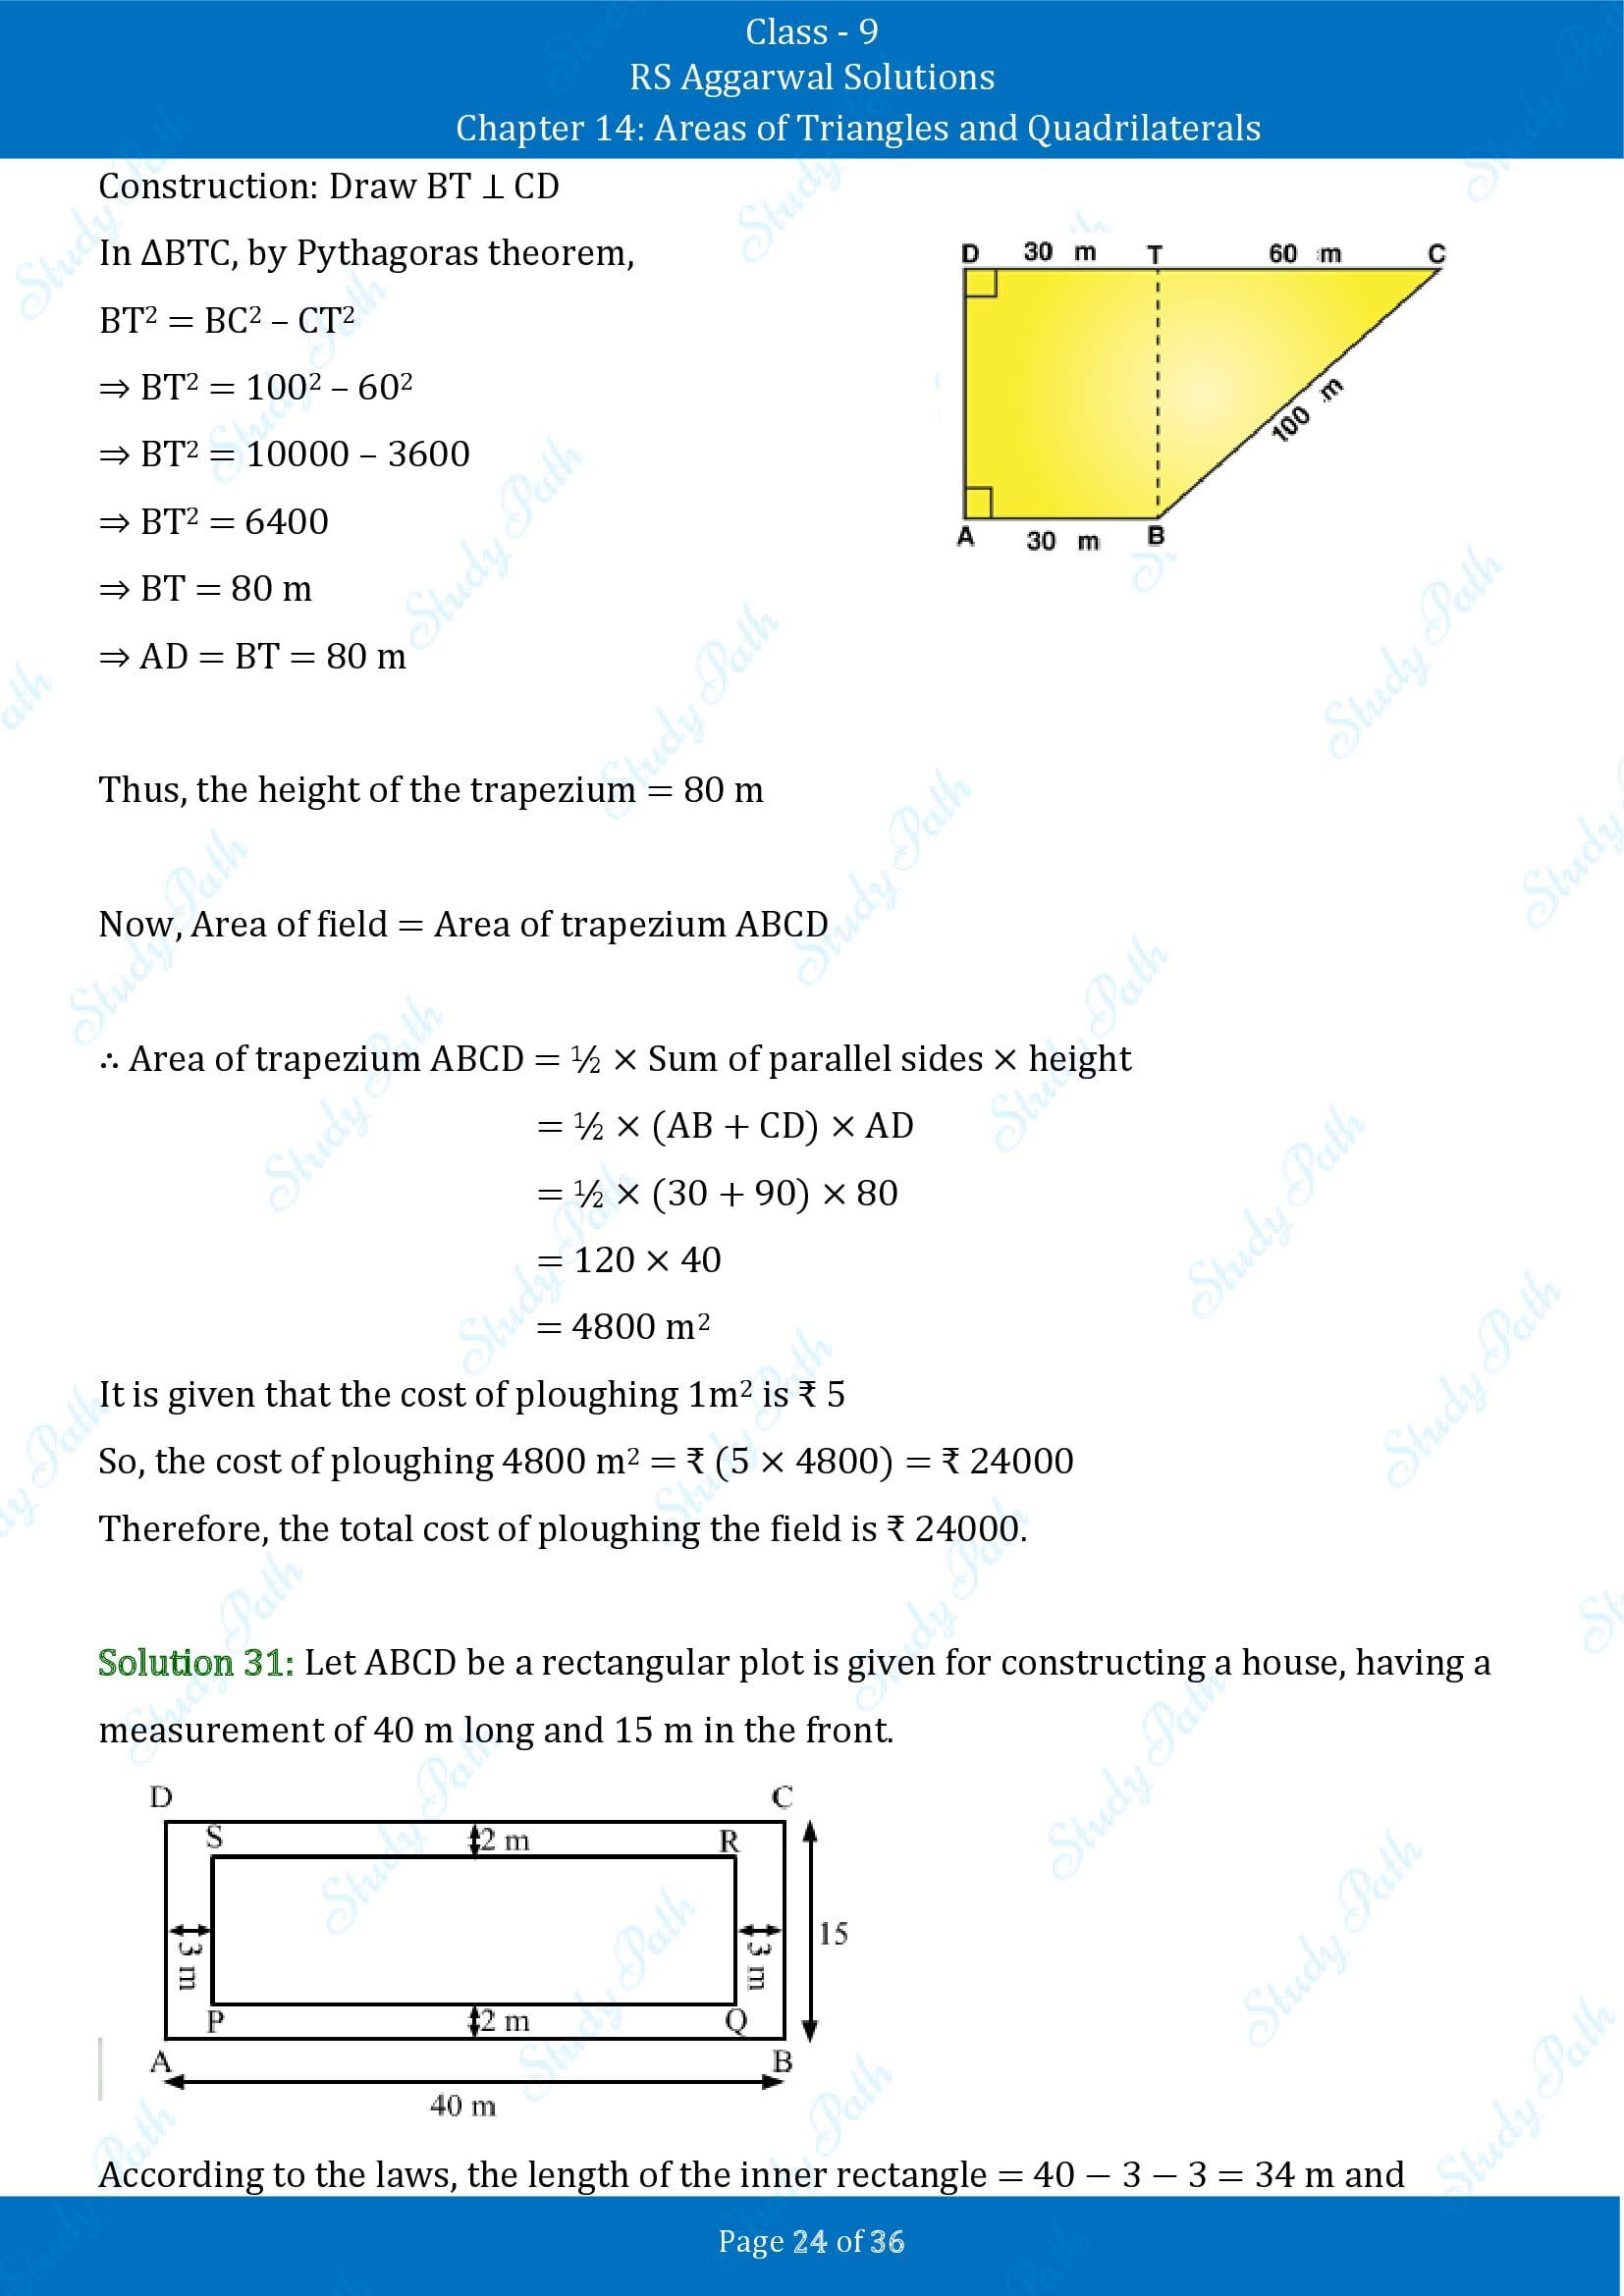 RS Aggarwal Solutions Class 9 Chapter 14 Areas of Triangles and Quadrilaterals Exercise 14 00024